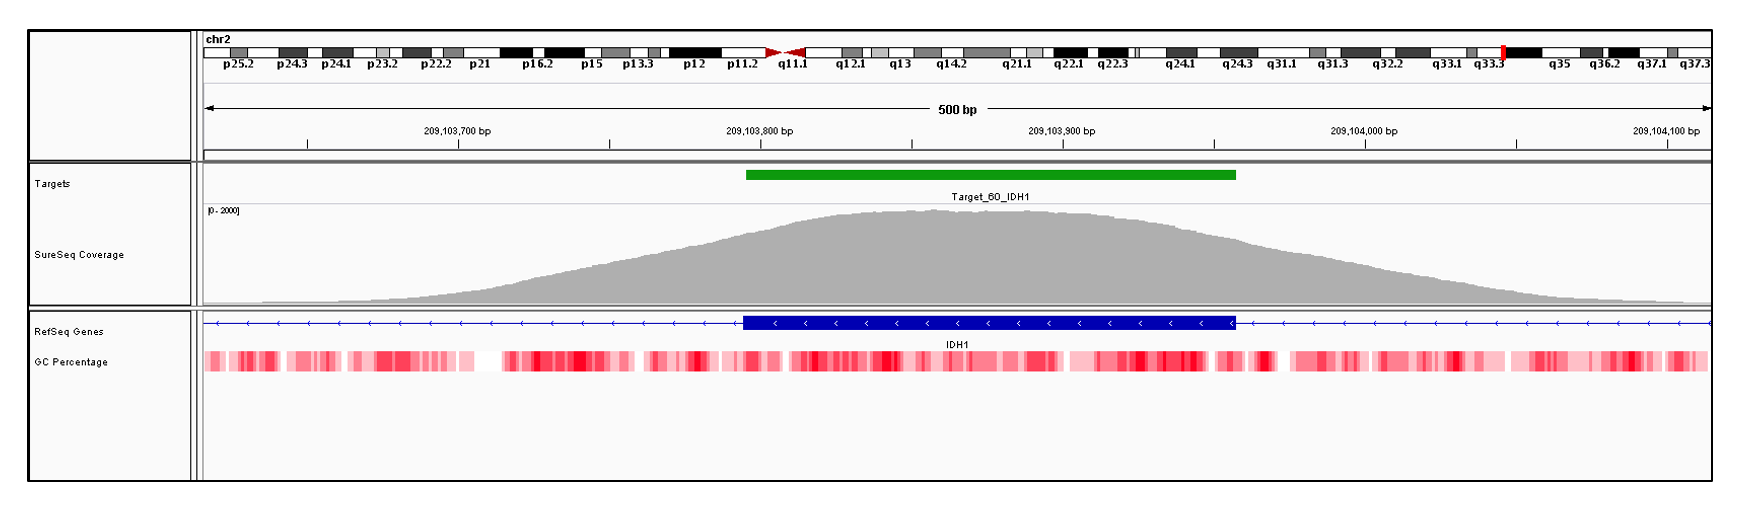 IDH1 Exon 9 (hg19 chr2:209103795-209103957). Depth of coverage per base (grey). Targeted region (green). Gene coding region as defined by RefSeq (blue). GC percentage (red). Image